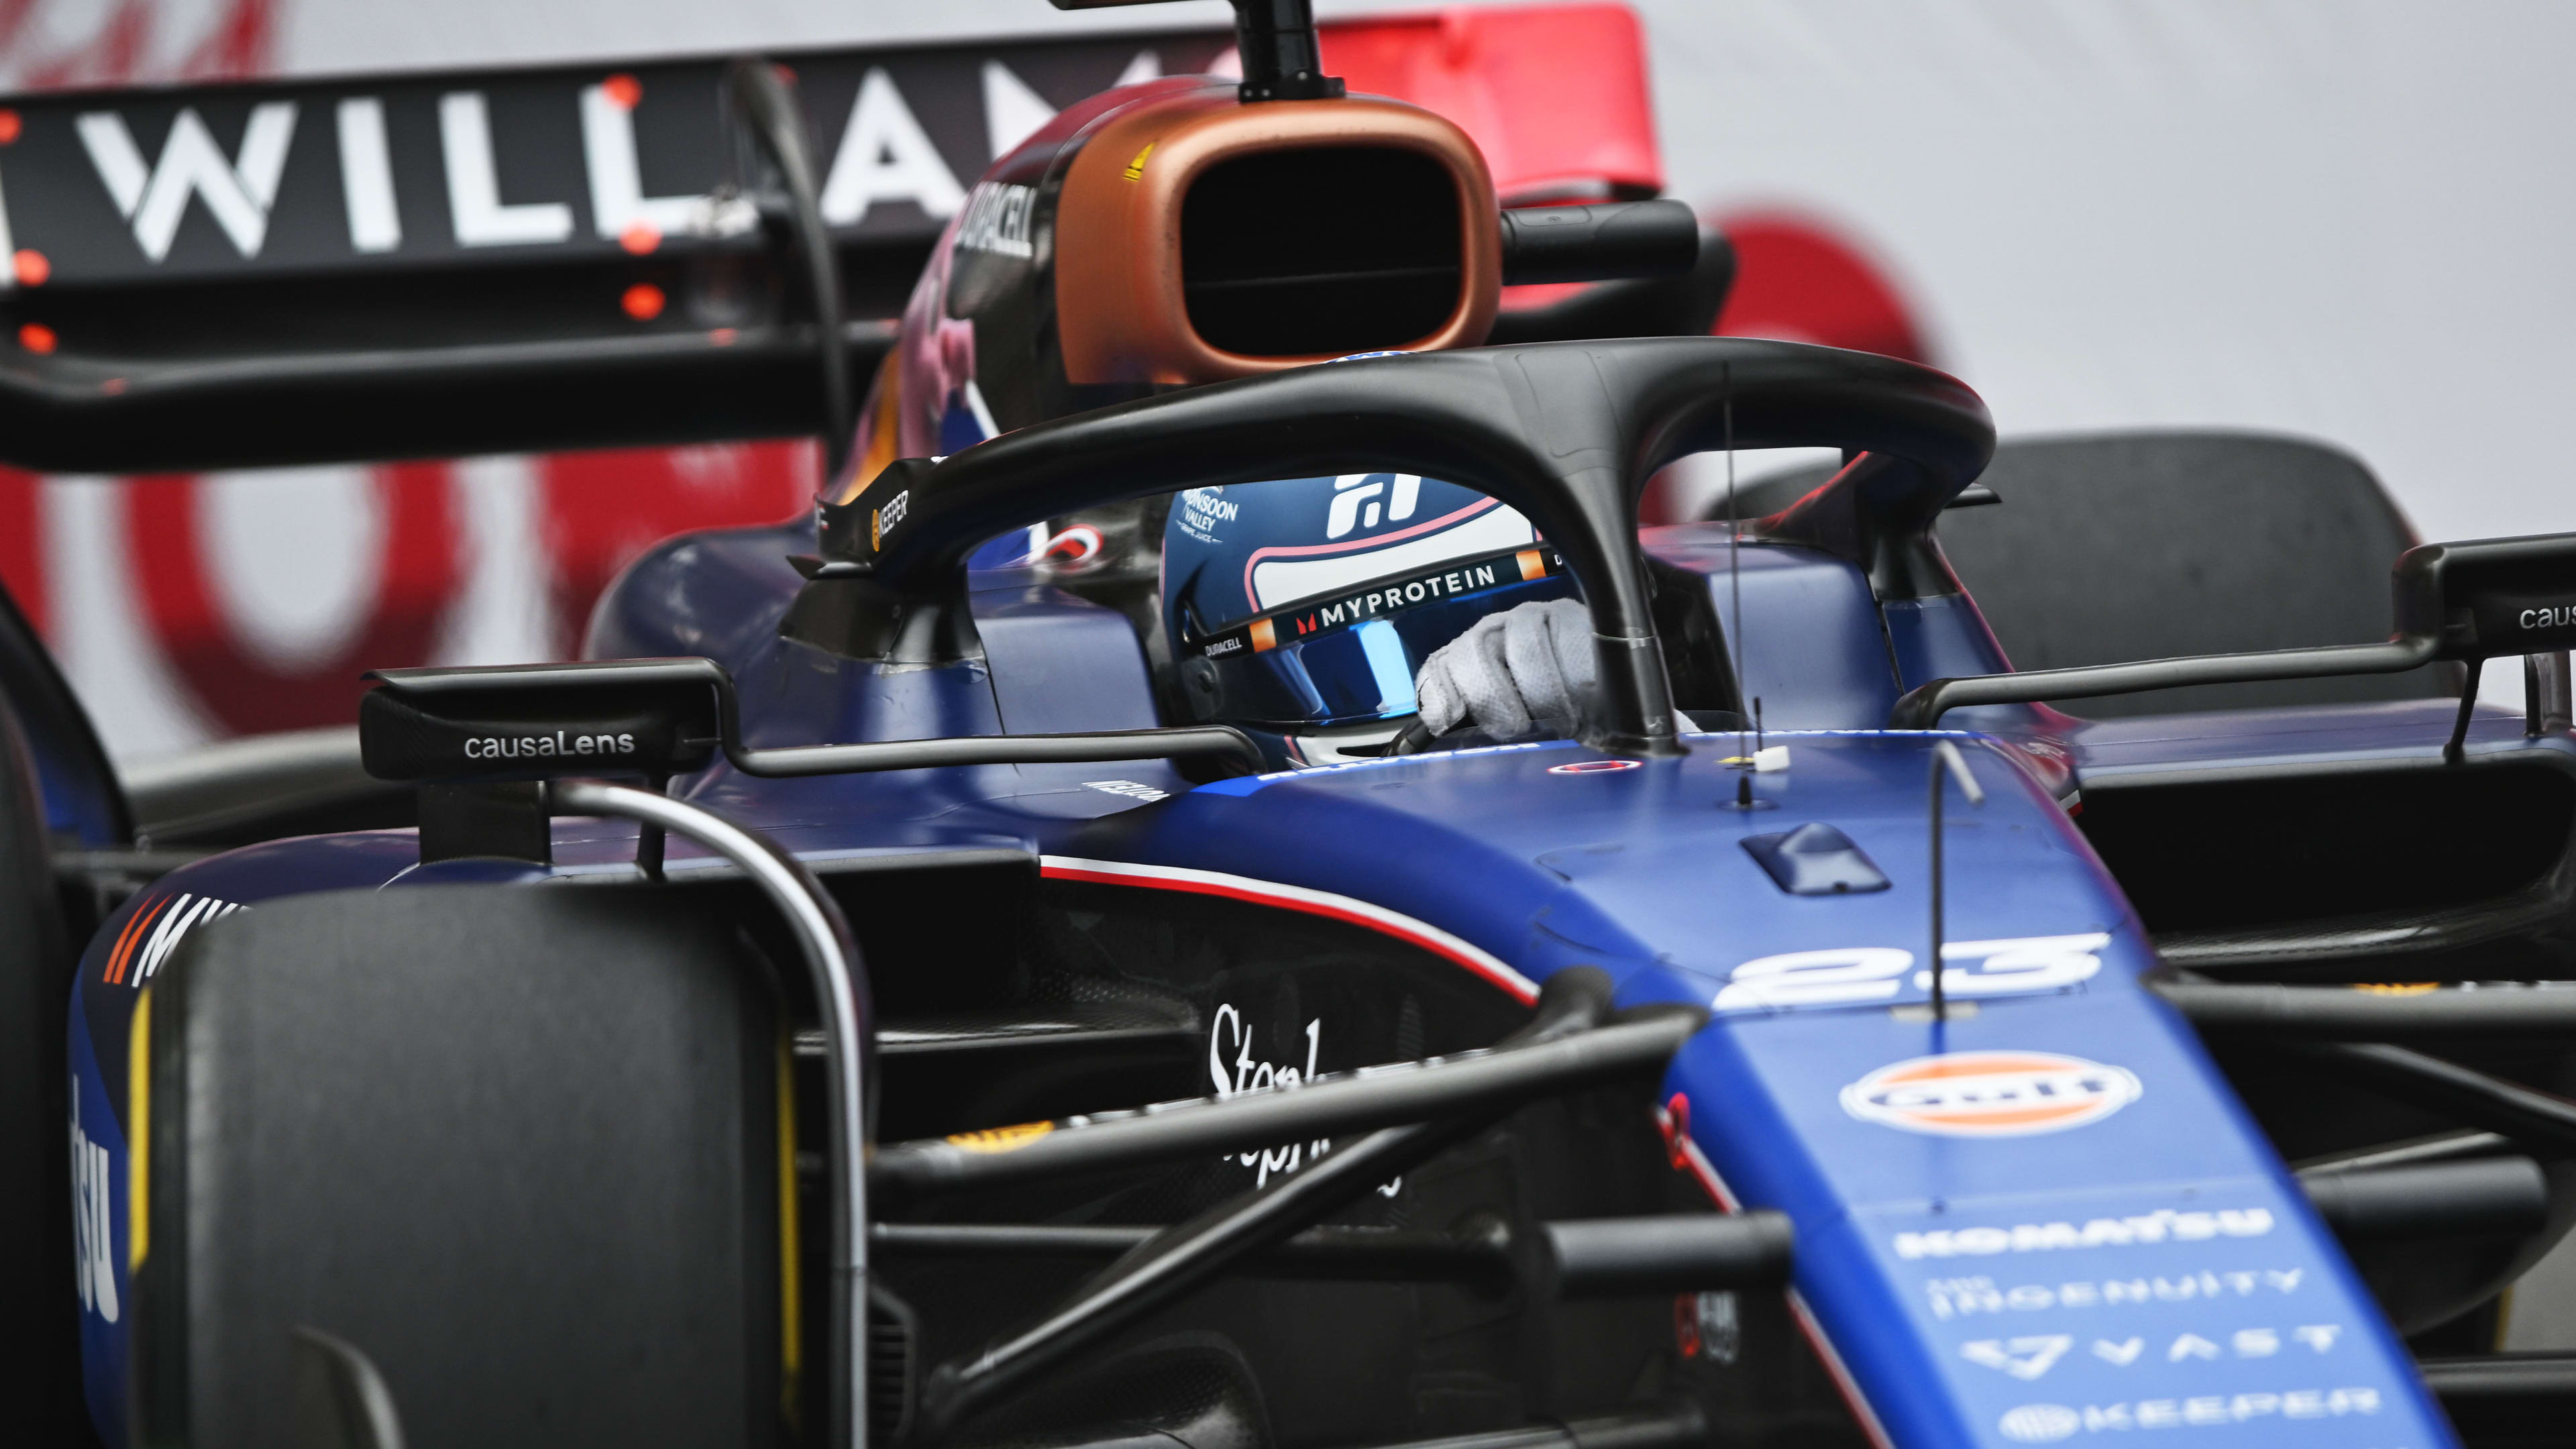 Albon hoping Williams can ‘hit our stride’ after breaking points duck in Monaco